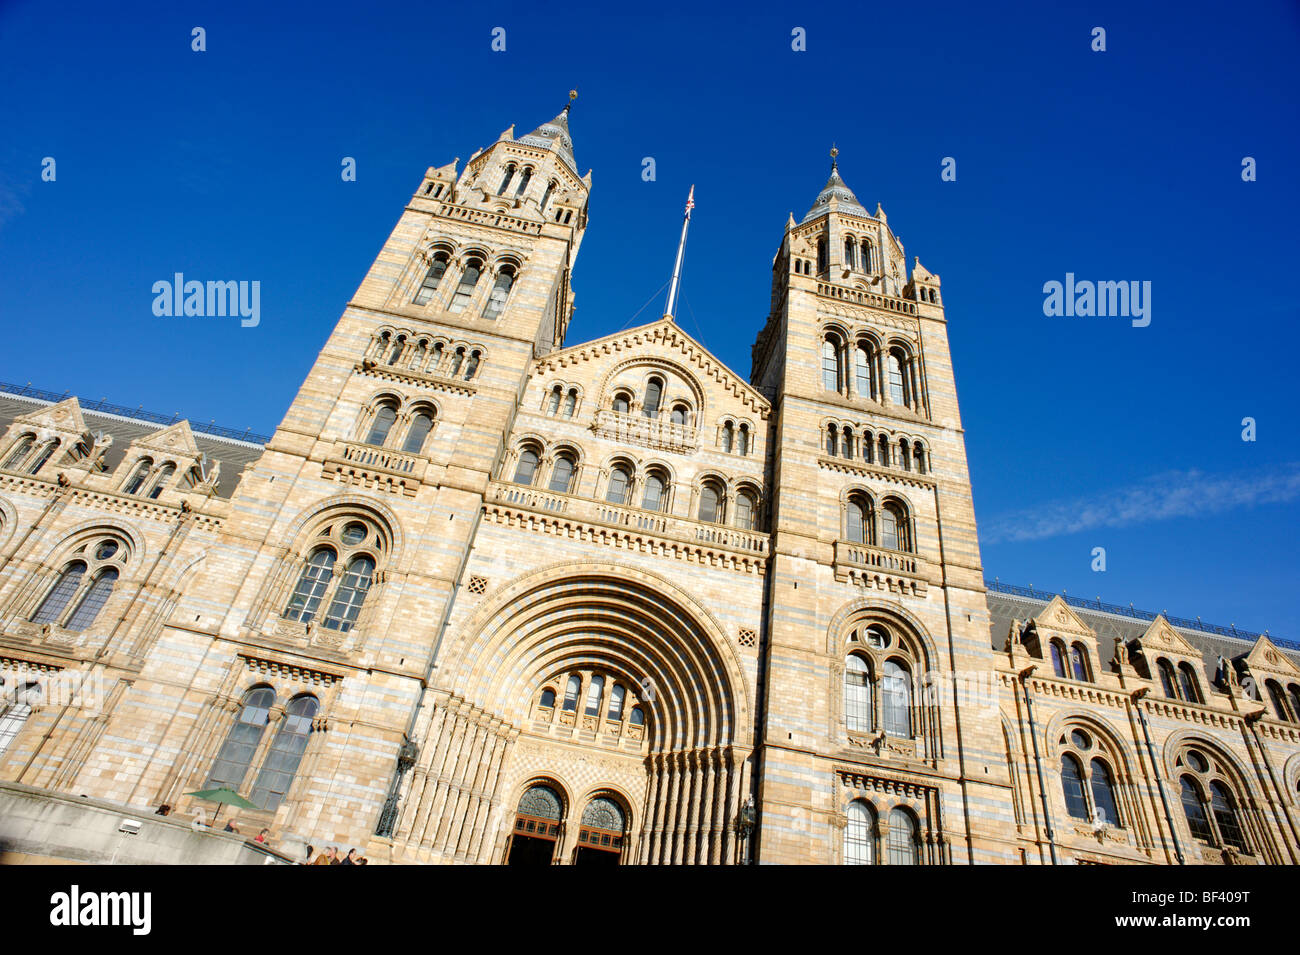 Waterhouse building of the Natural History Museum front entrance. London. UK 2009. Stock Photo